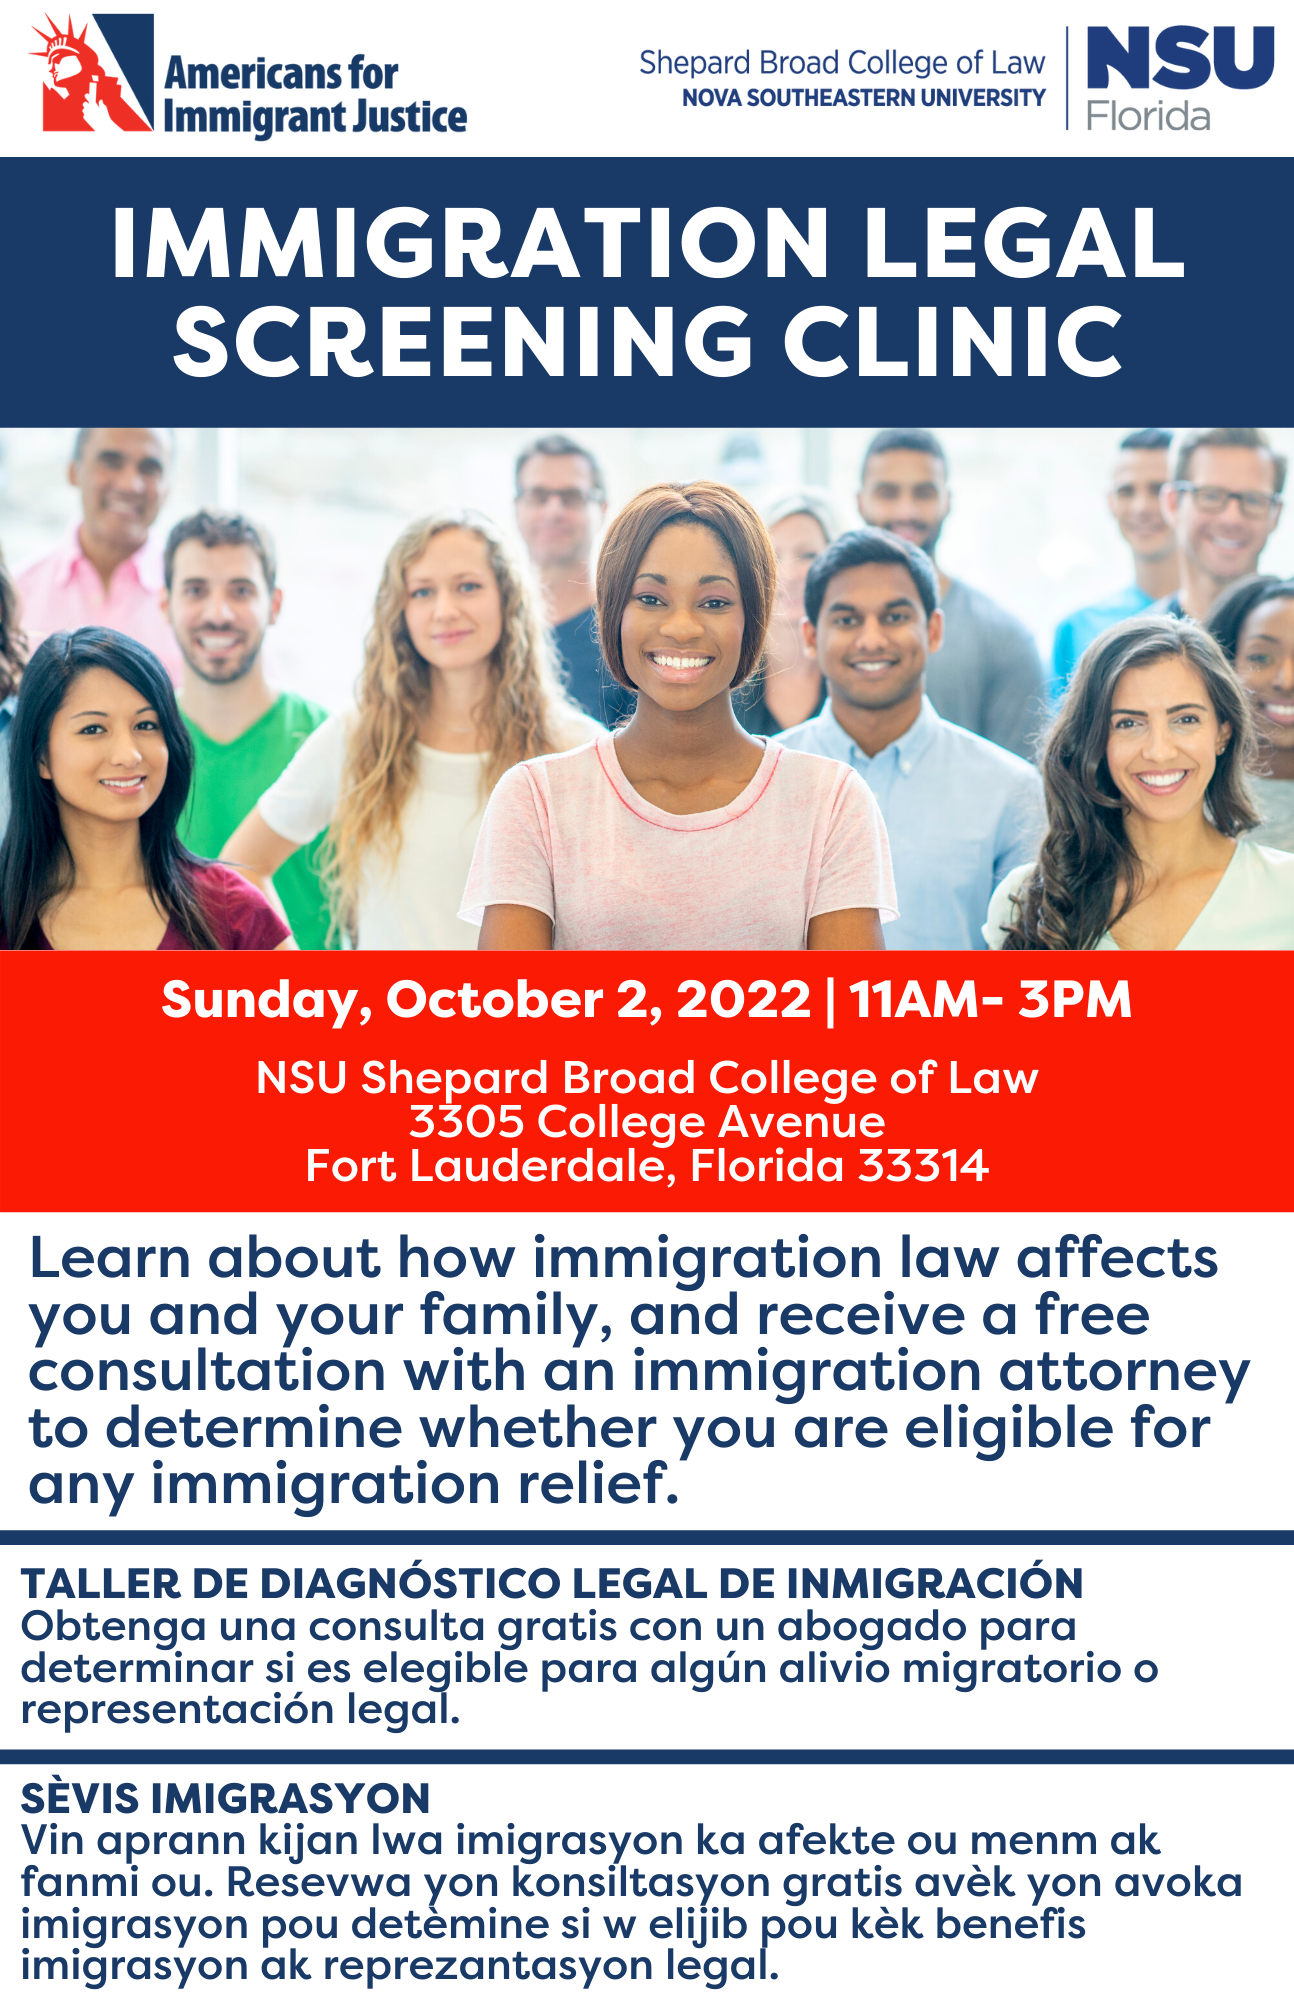 Sunday, October 2, 2022, 11AM to 3PM at NSU Shepard Broad College of Law 3305 College Avenue, Leo Goodwin Sr. Hall Fort Lauderdale, Florida 33314